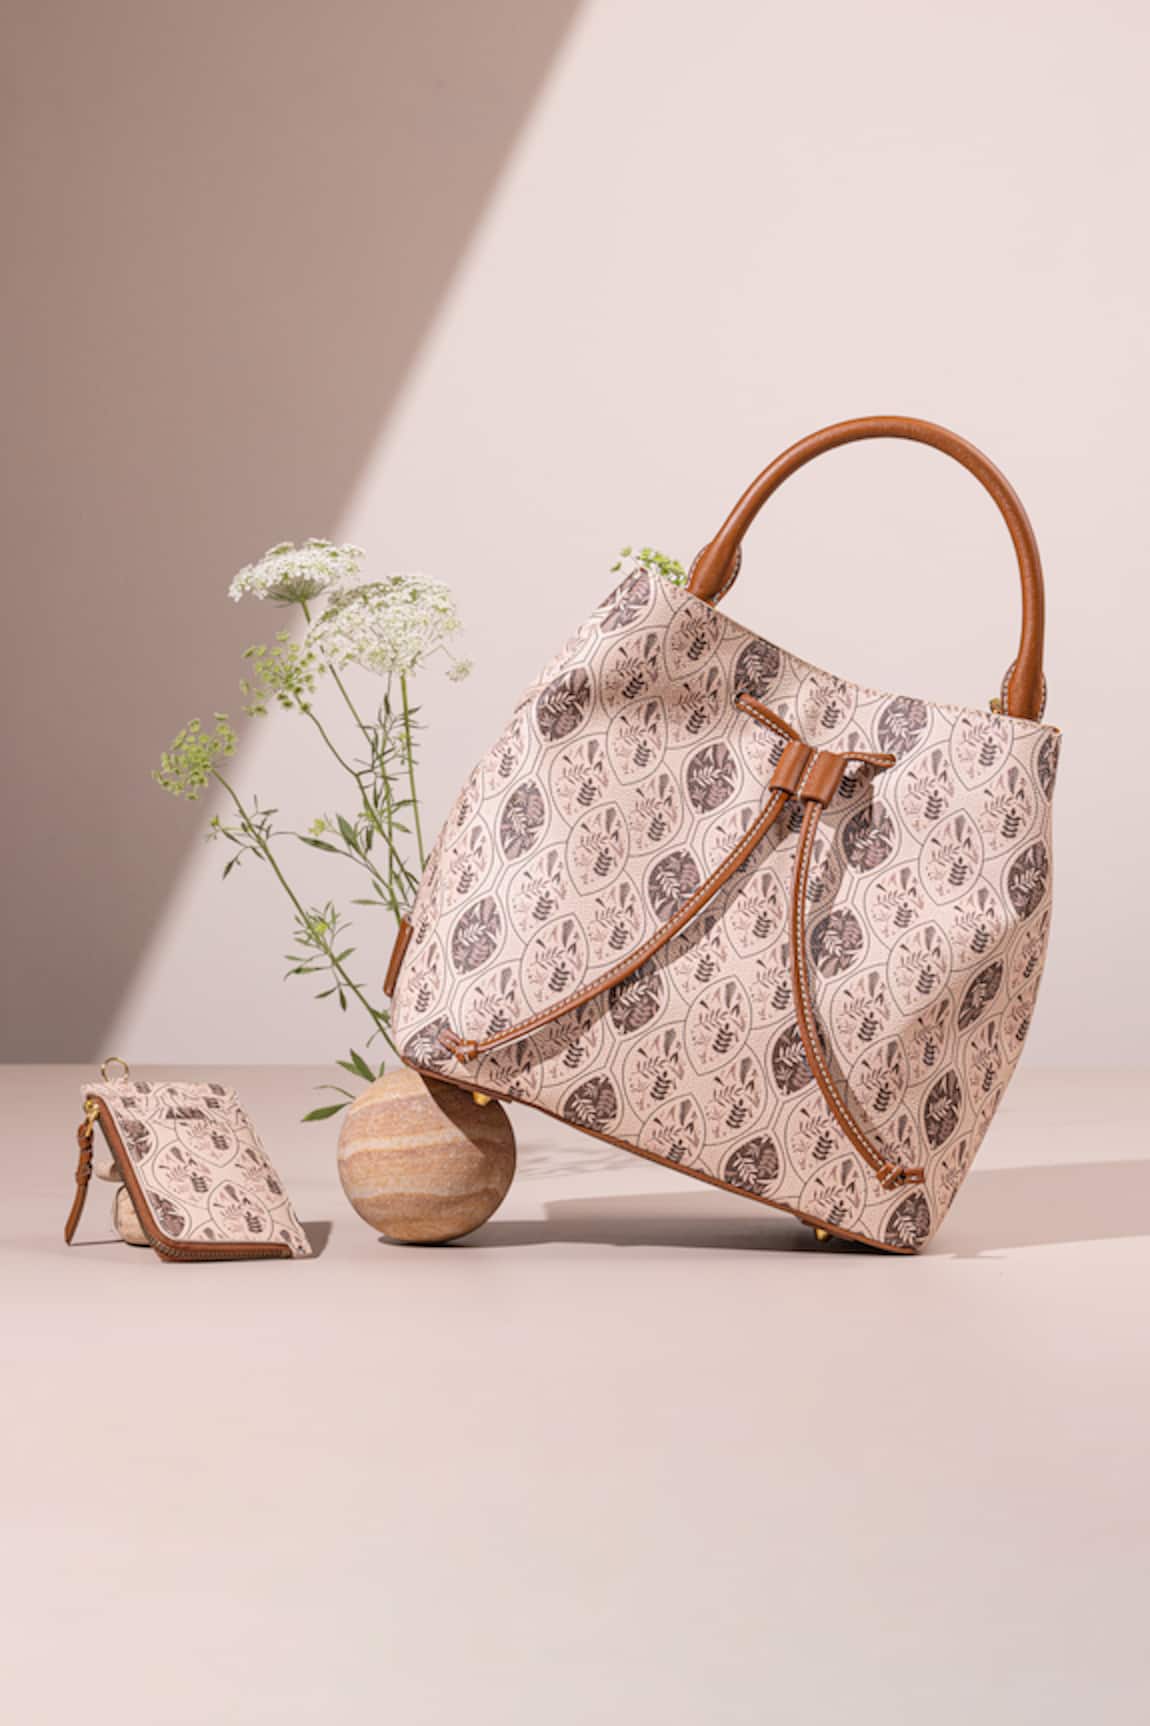 The Leather Garden Florida Leather Foliage Pattern Bucket Bag